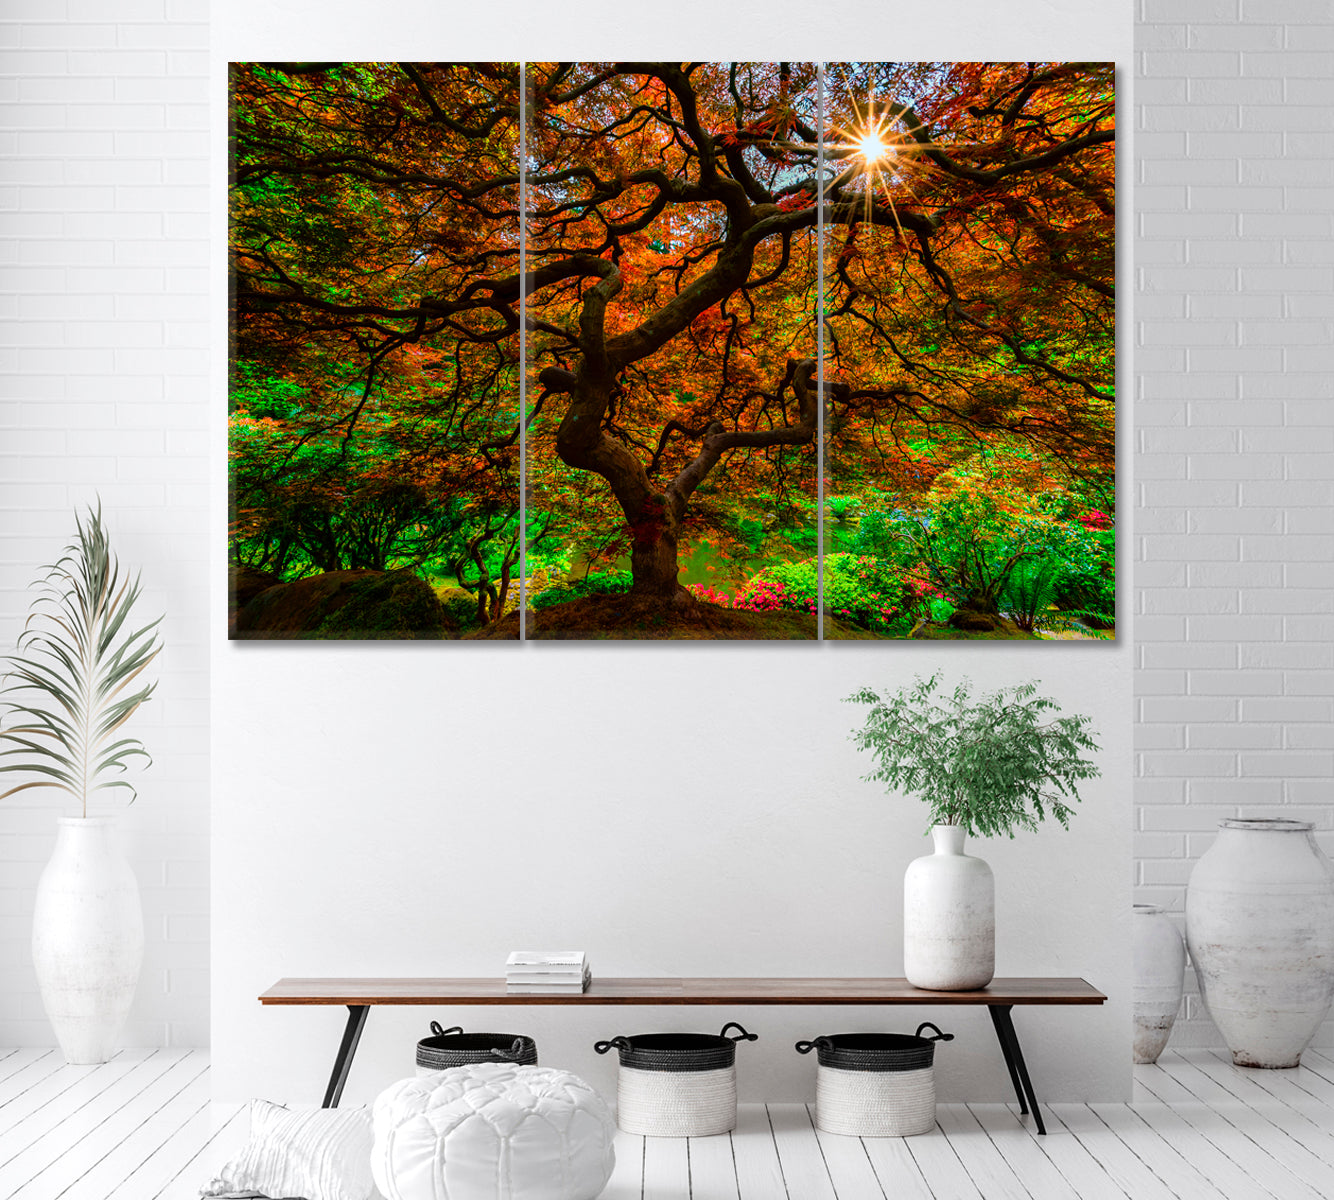 Japanese Maple Tree in Portland Japanese Garden Canvas Print ArtLexy 3 Panels 36"x24" inches 